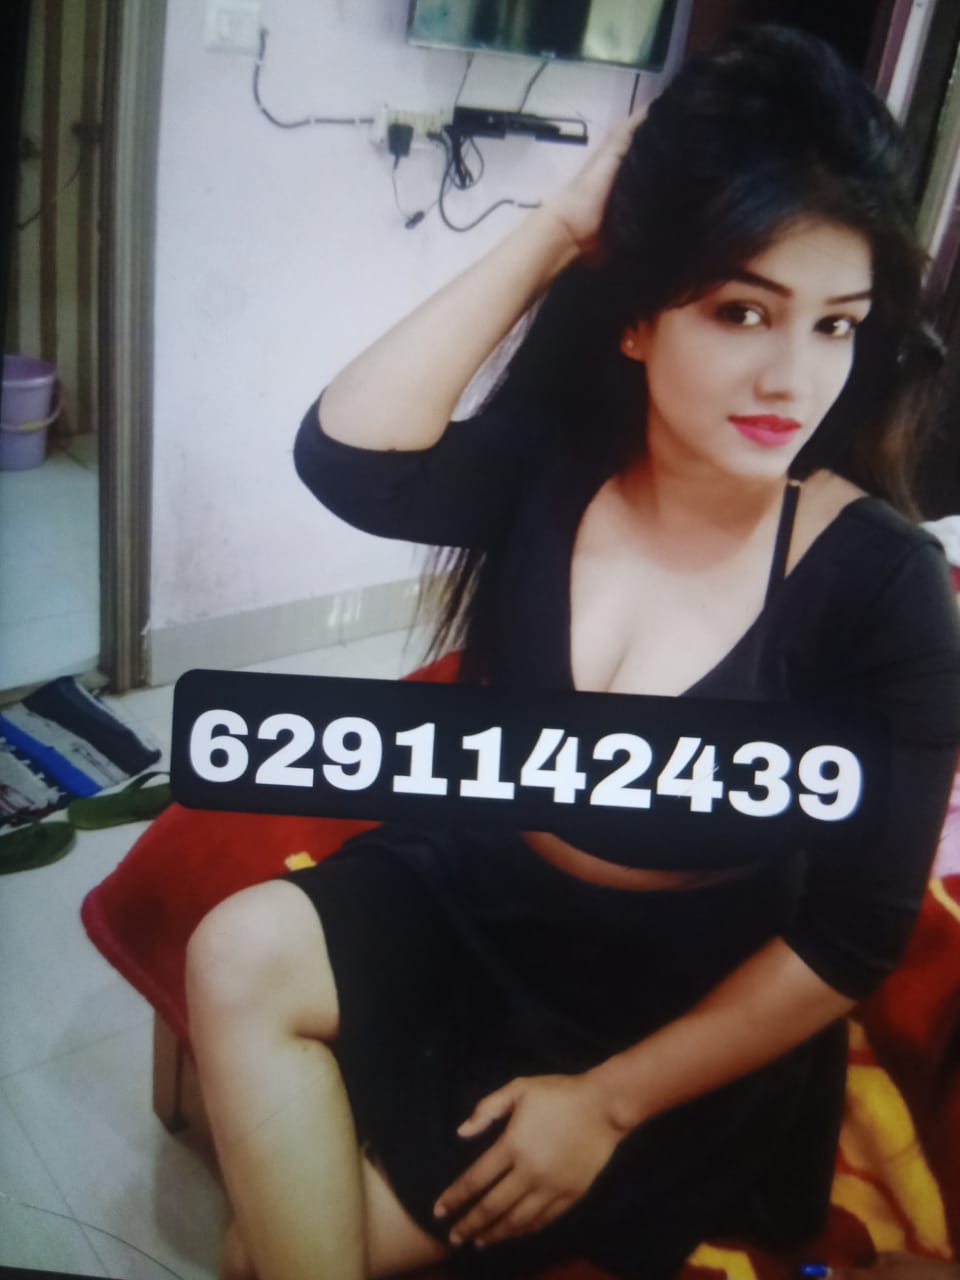 Poilwa high profile  best service available here any high profile